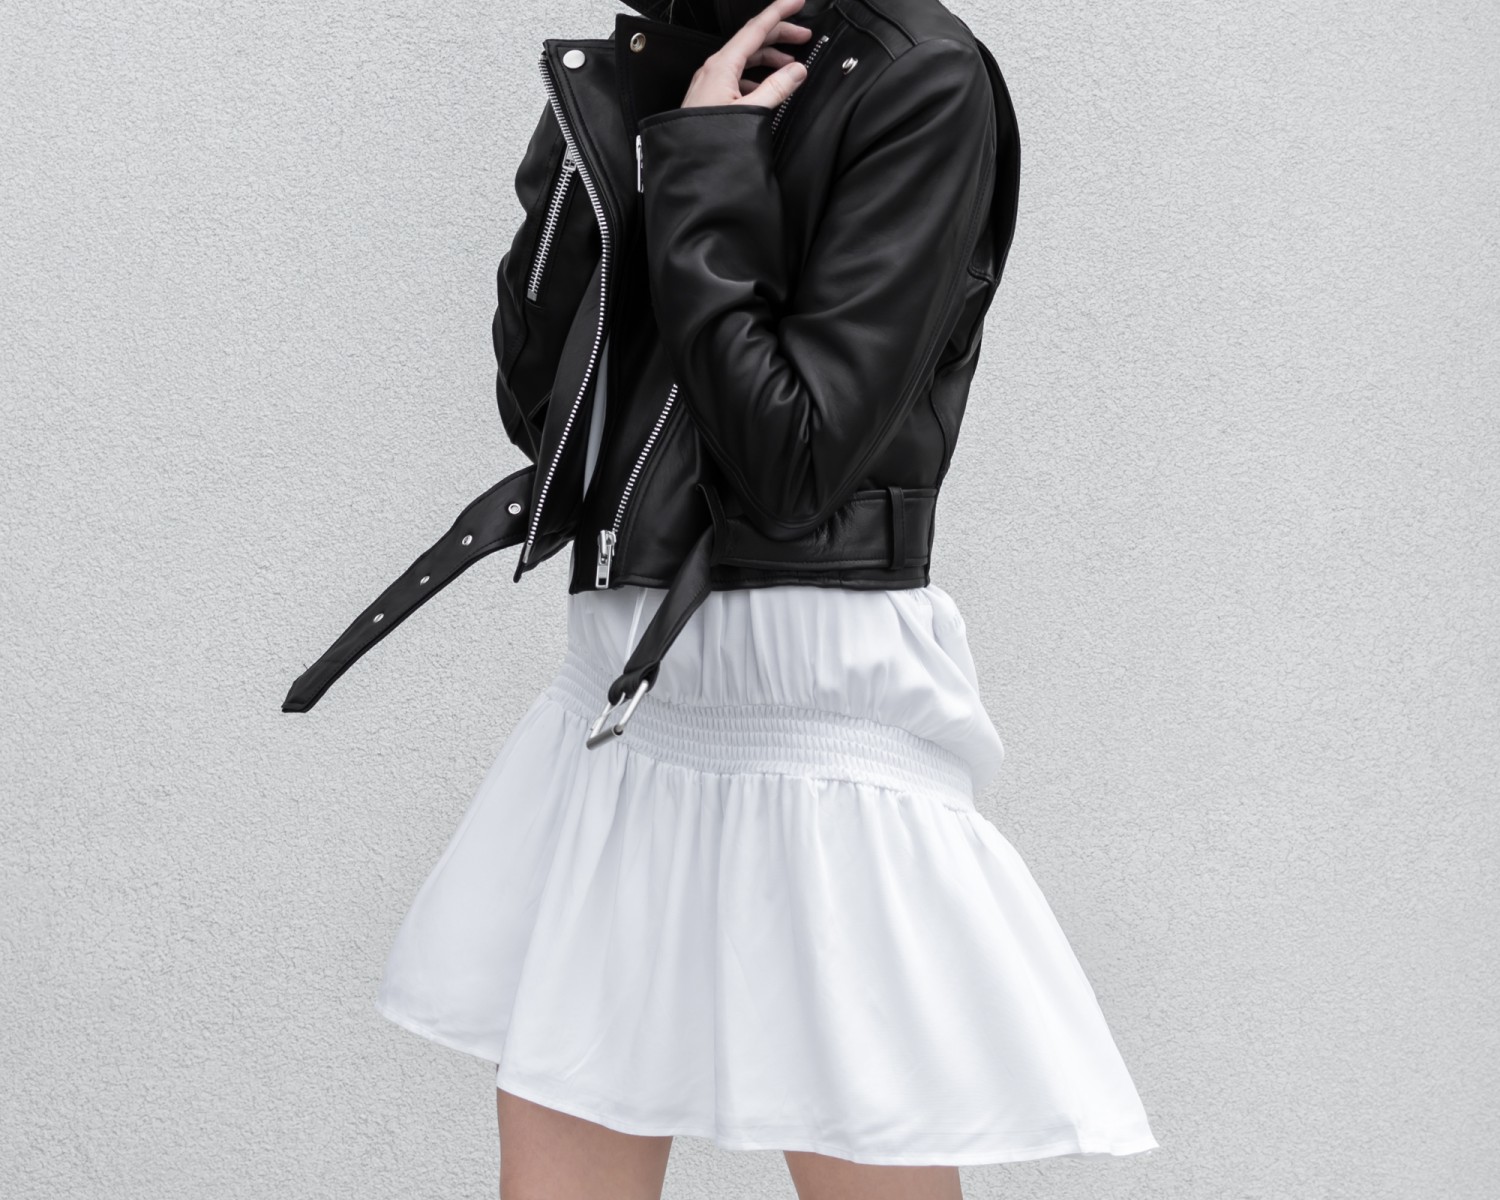 figtny.com | Primary NYC Leather Jacket and Dress